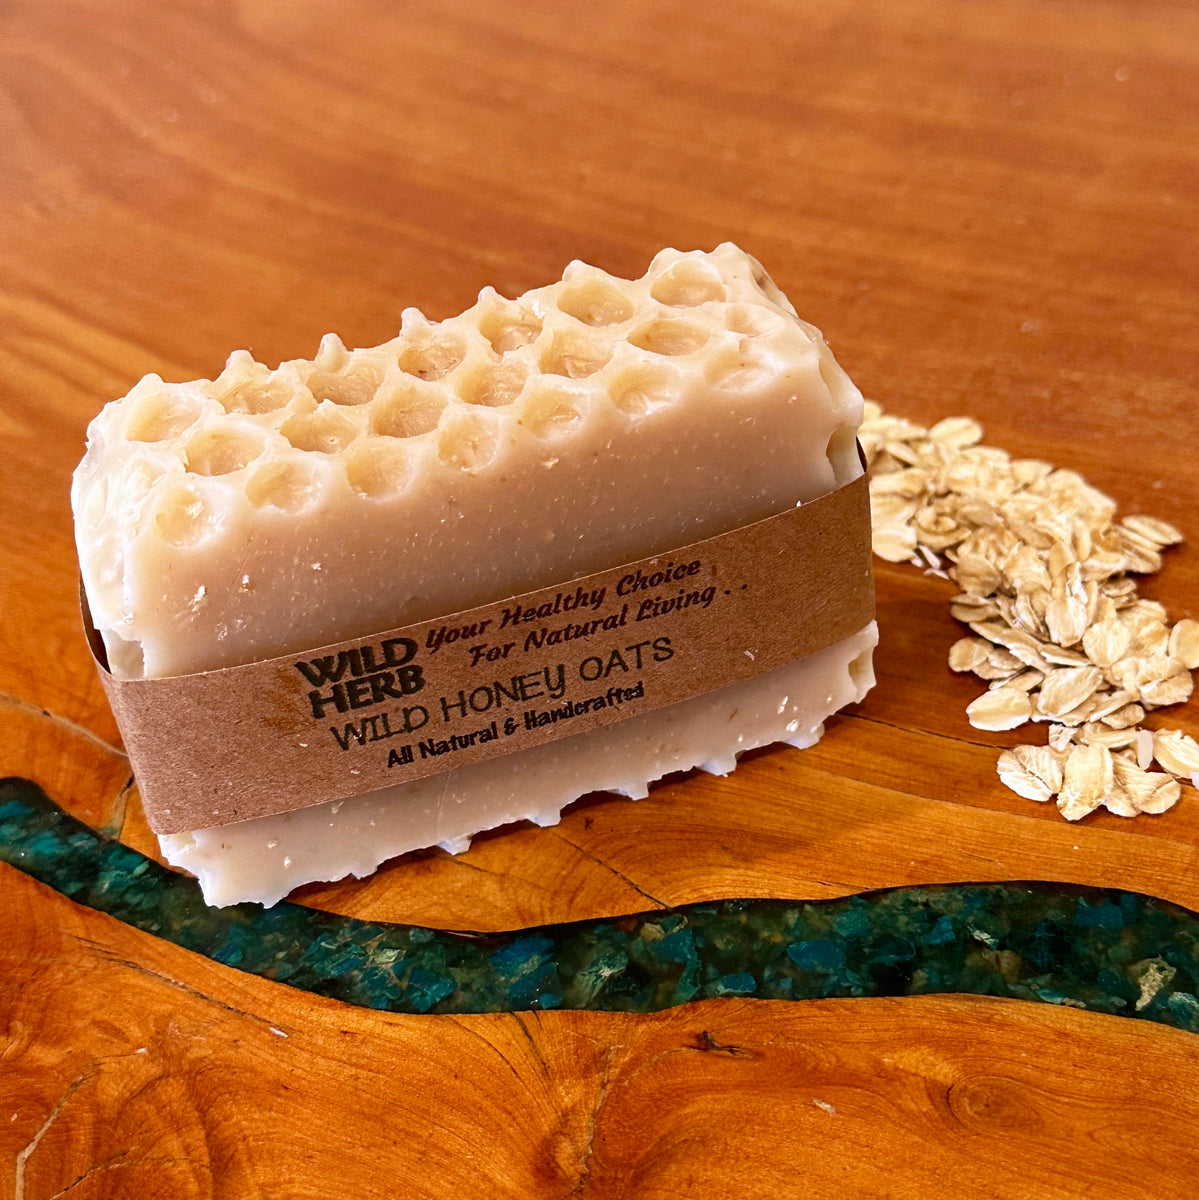 Wild Honey Oats Natural Exfoliating Soap Bar with Honeycomb Trim  Wild  Herb Soap – Wild Herb Your Healthy Choice for Natural Living